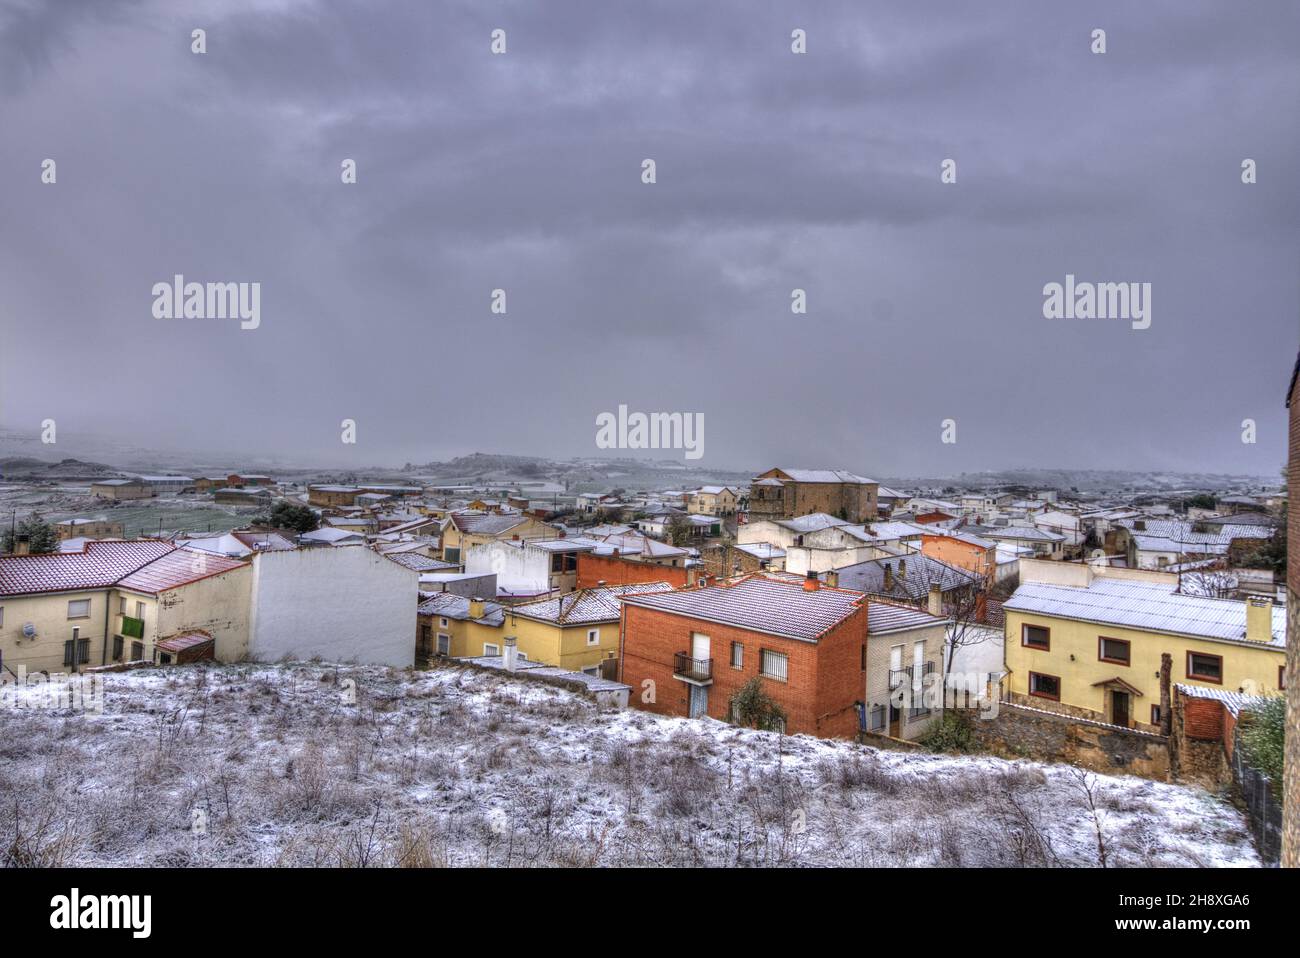 panoramic photography of a town full of snow Stock Photo